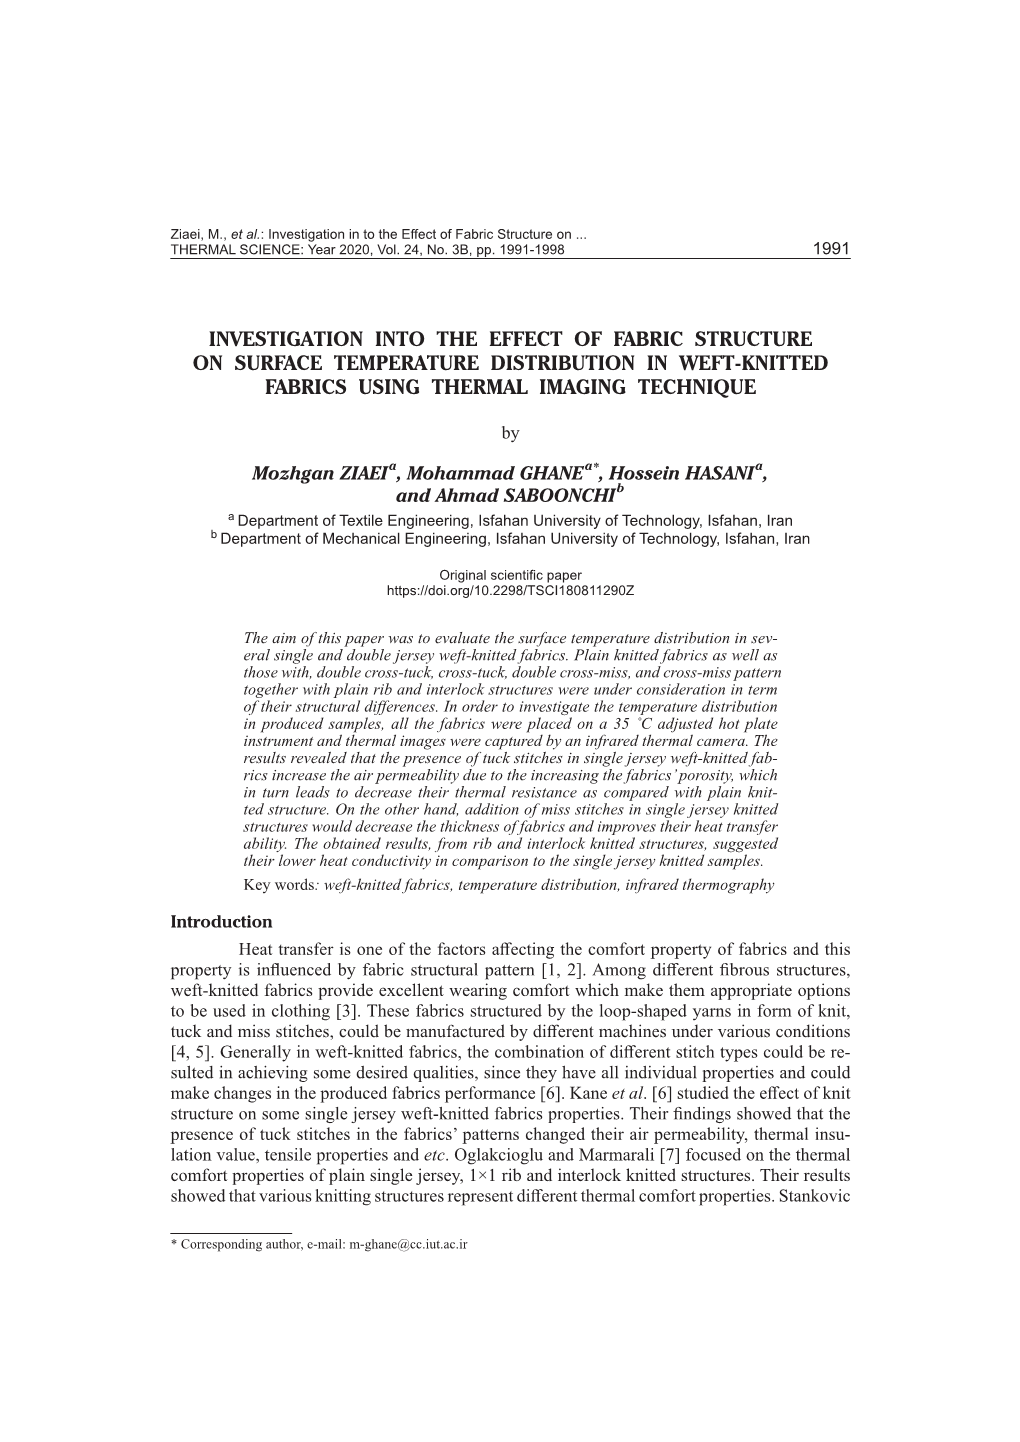 Investigation Into the Effect of Fabric Structure on Surface Temperature Distribution in Weft-Knitted Fabrics Using Thermal Imaging Technique